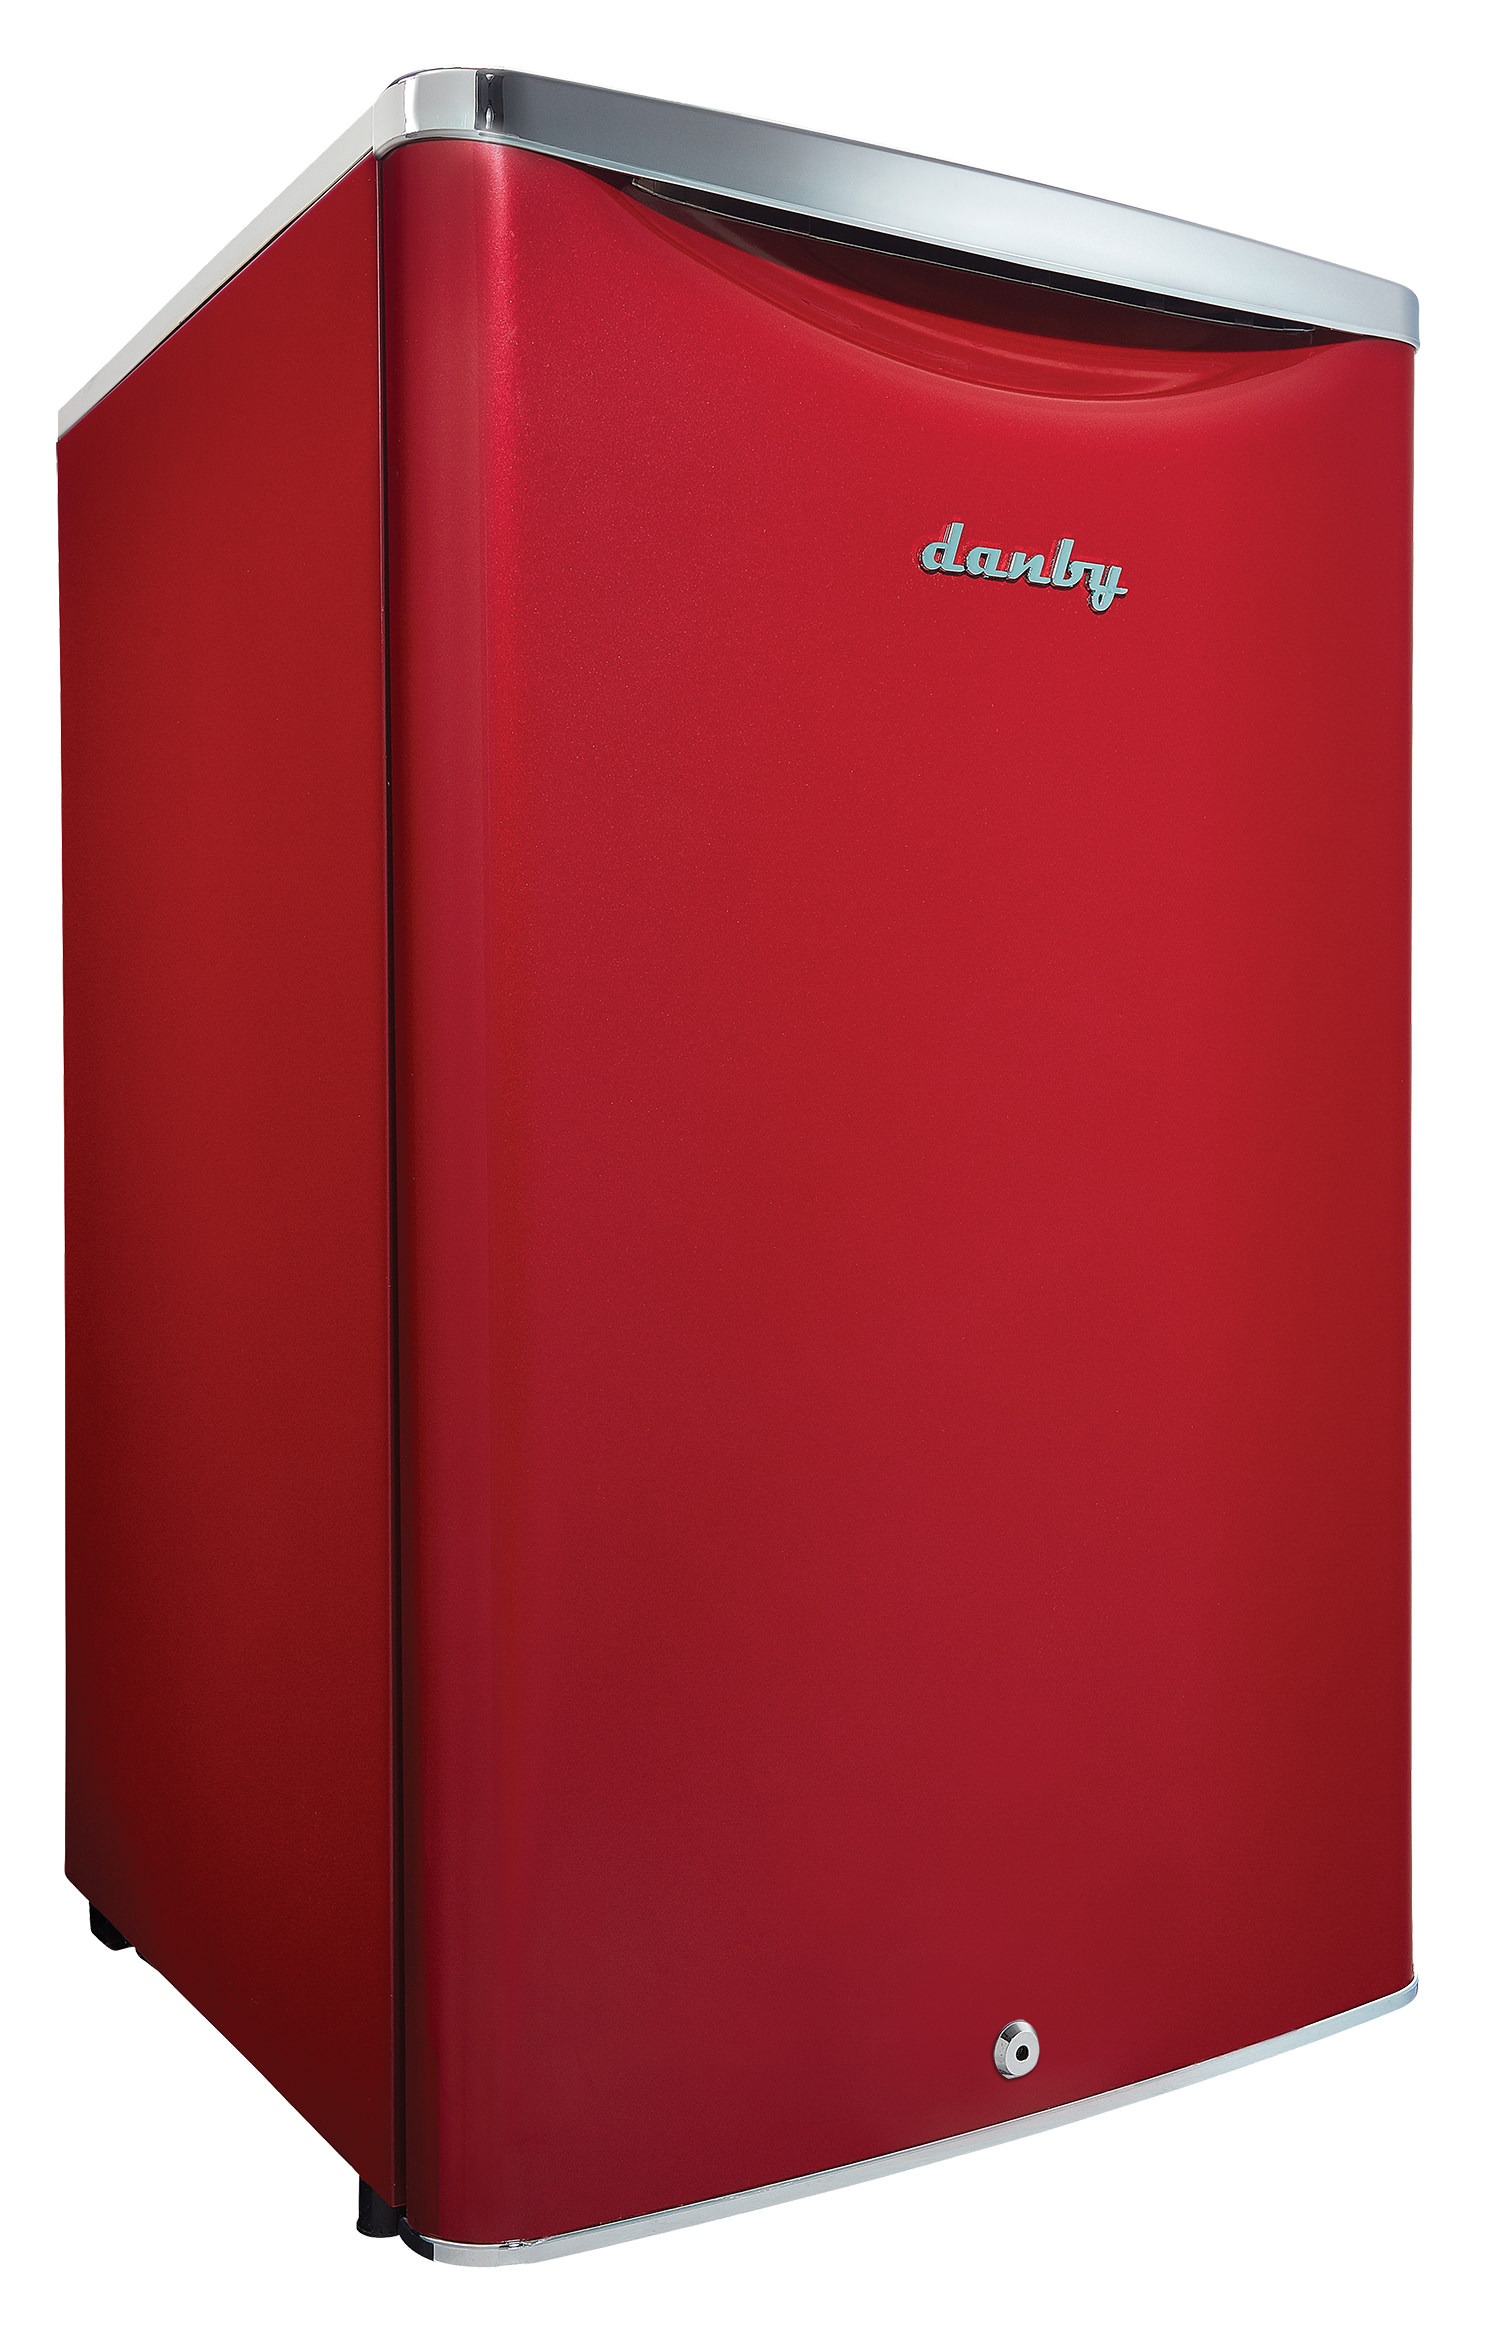 Danby DAR044A6LDB 4.4 Cu. Ft. (124 L) Capacity Retro Mini All-Refrigerator in Metallic Red Featuring Danby’s patented design and Energy Star Compliant - image 1 of 9